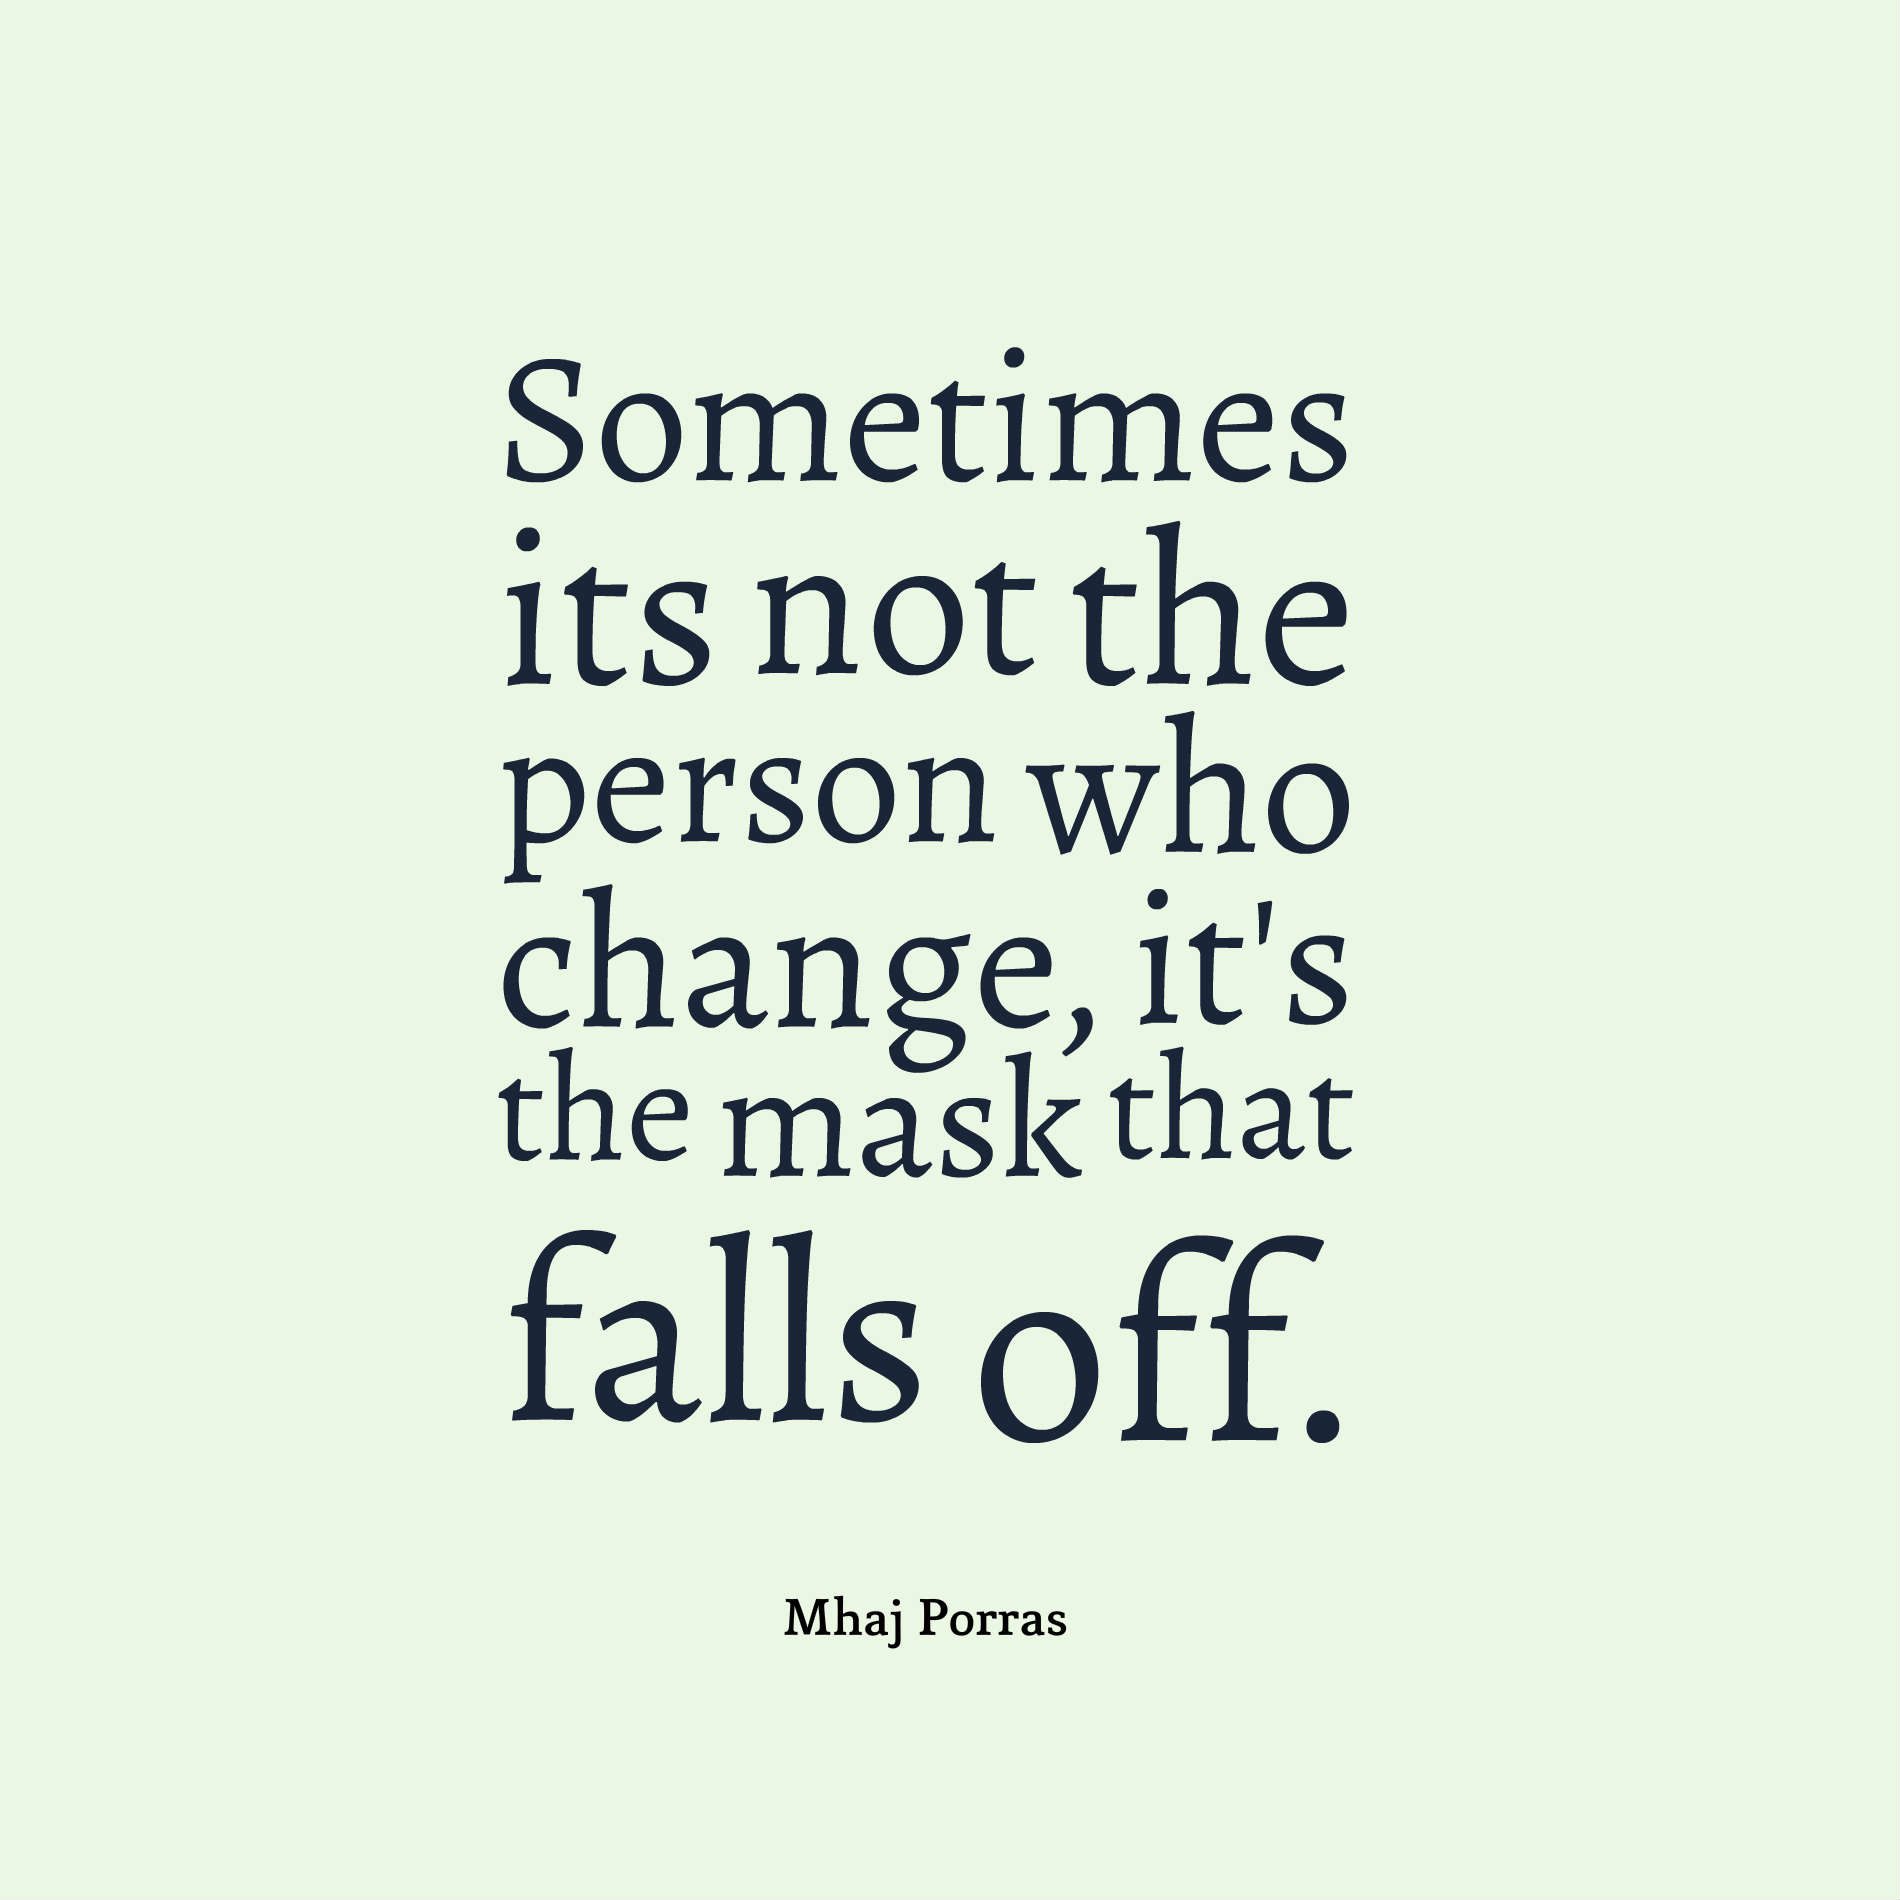 Sometimes its not the person who change, it's the mask that falls off.